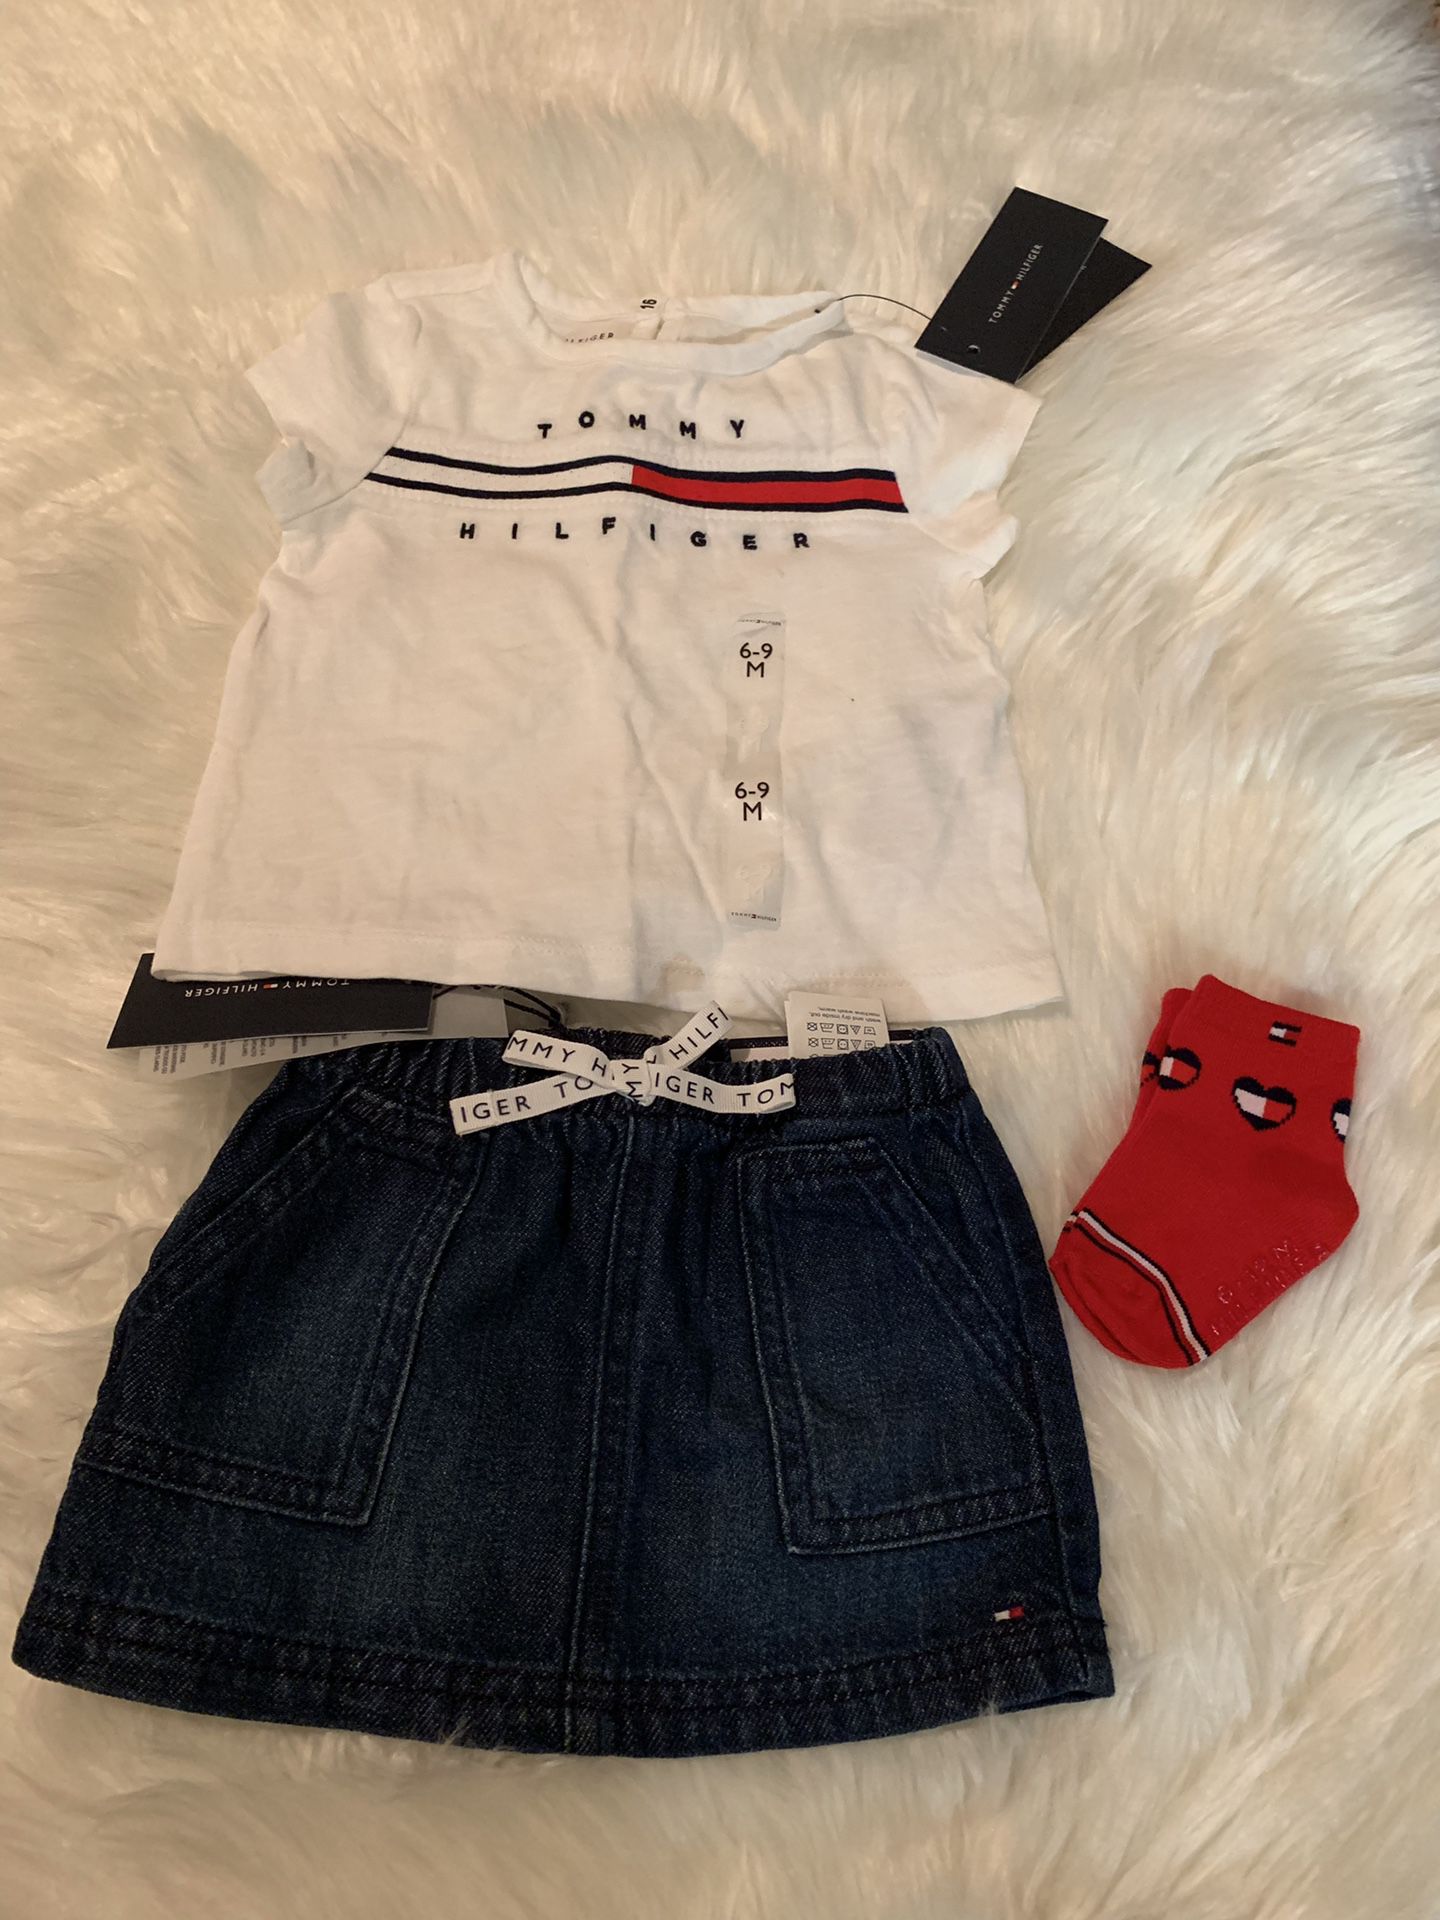 Girls Tommy Hilfiger Outfit Size 6/9 months